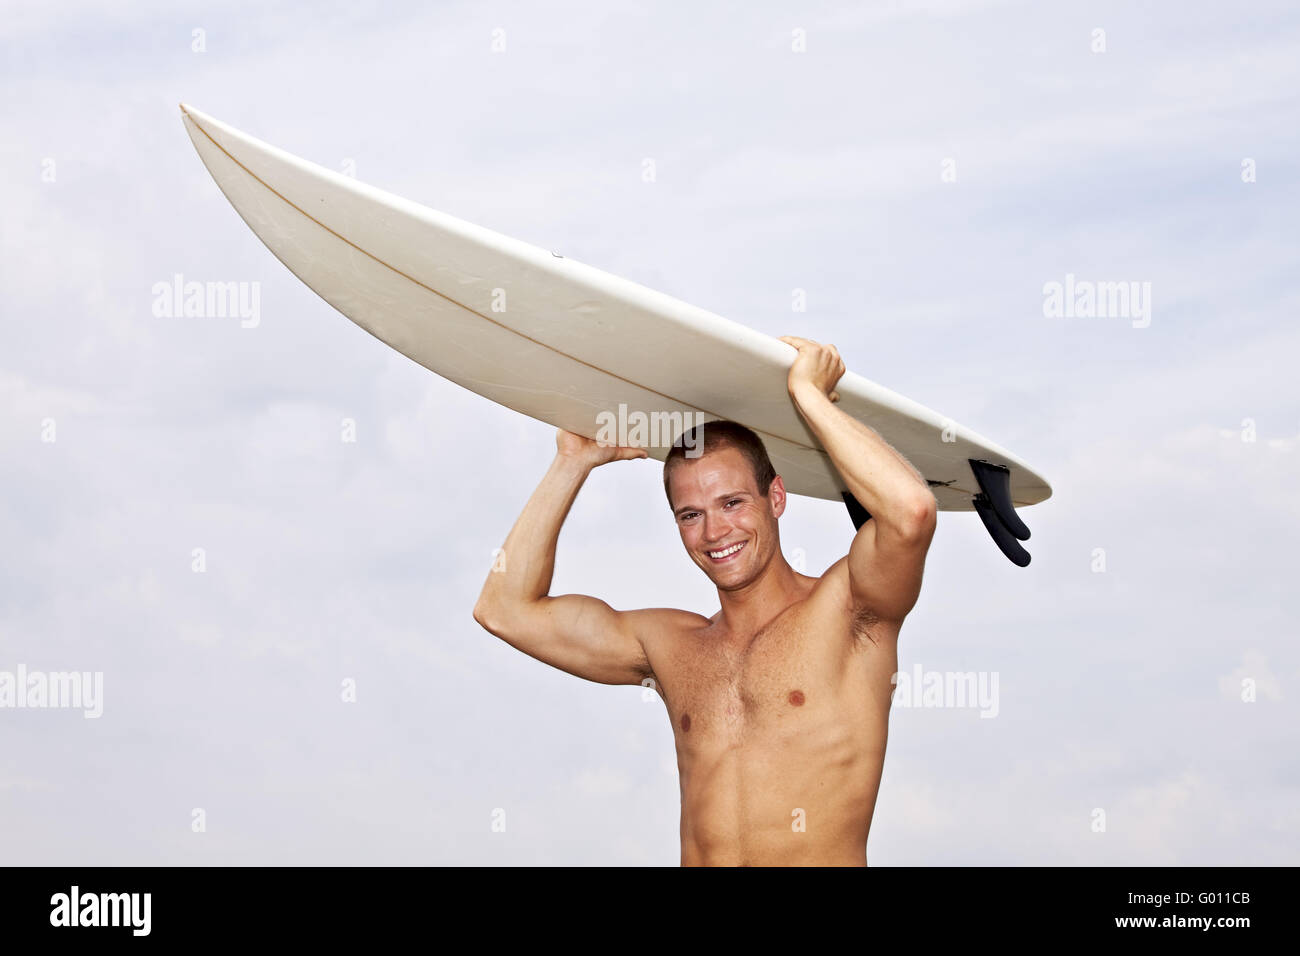 young man holding a surf board outdoors Stock Photo